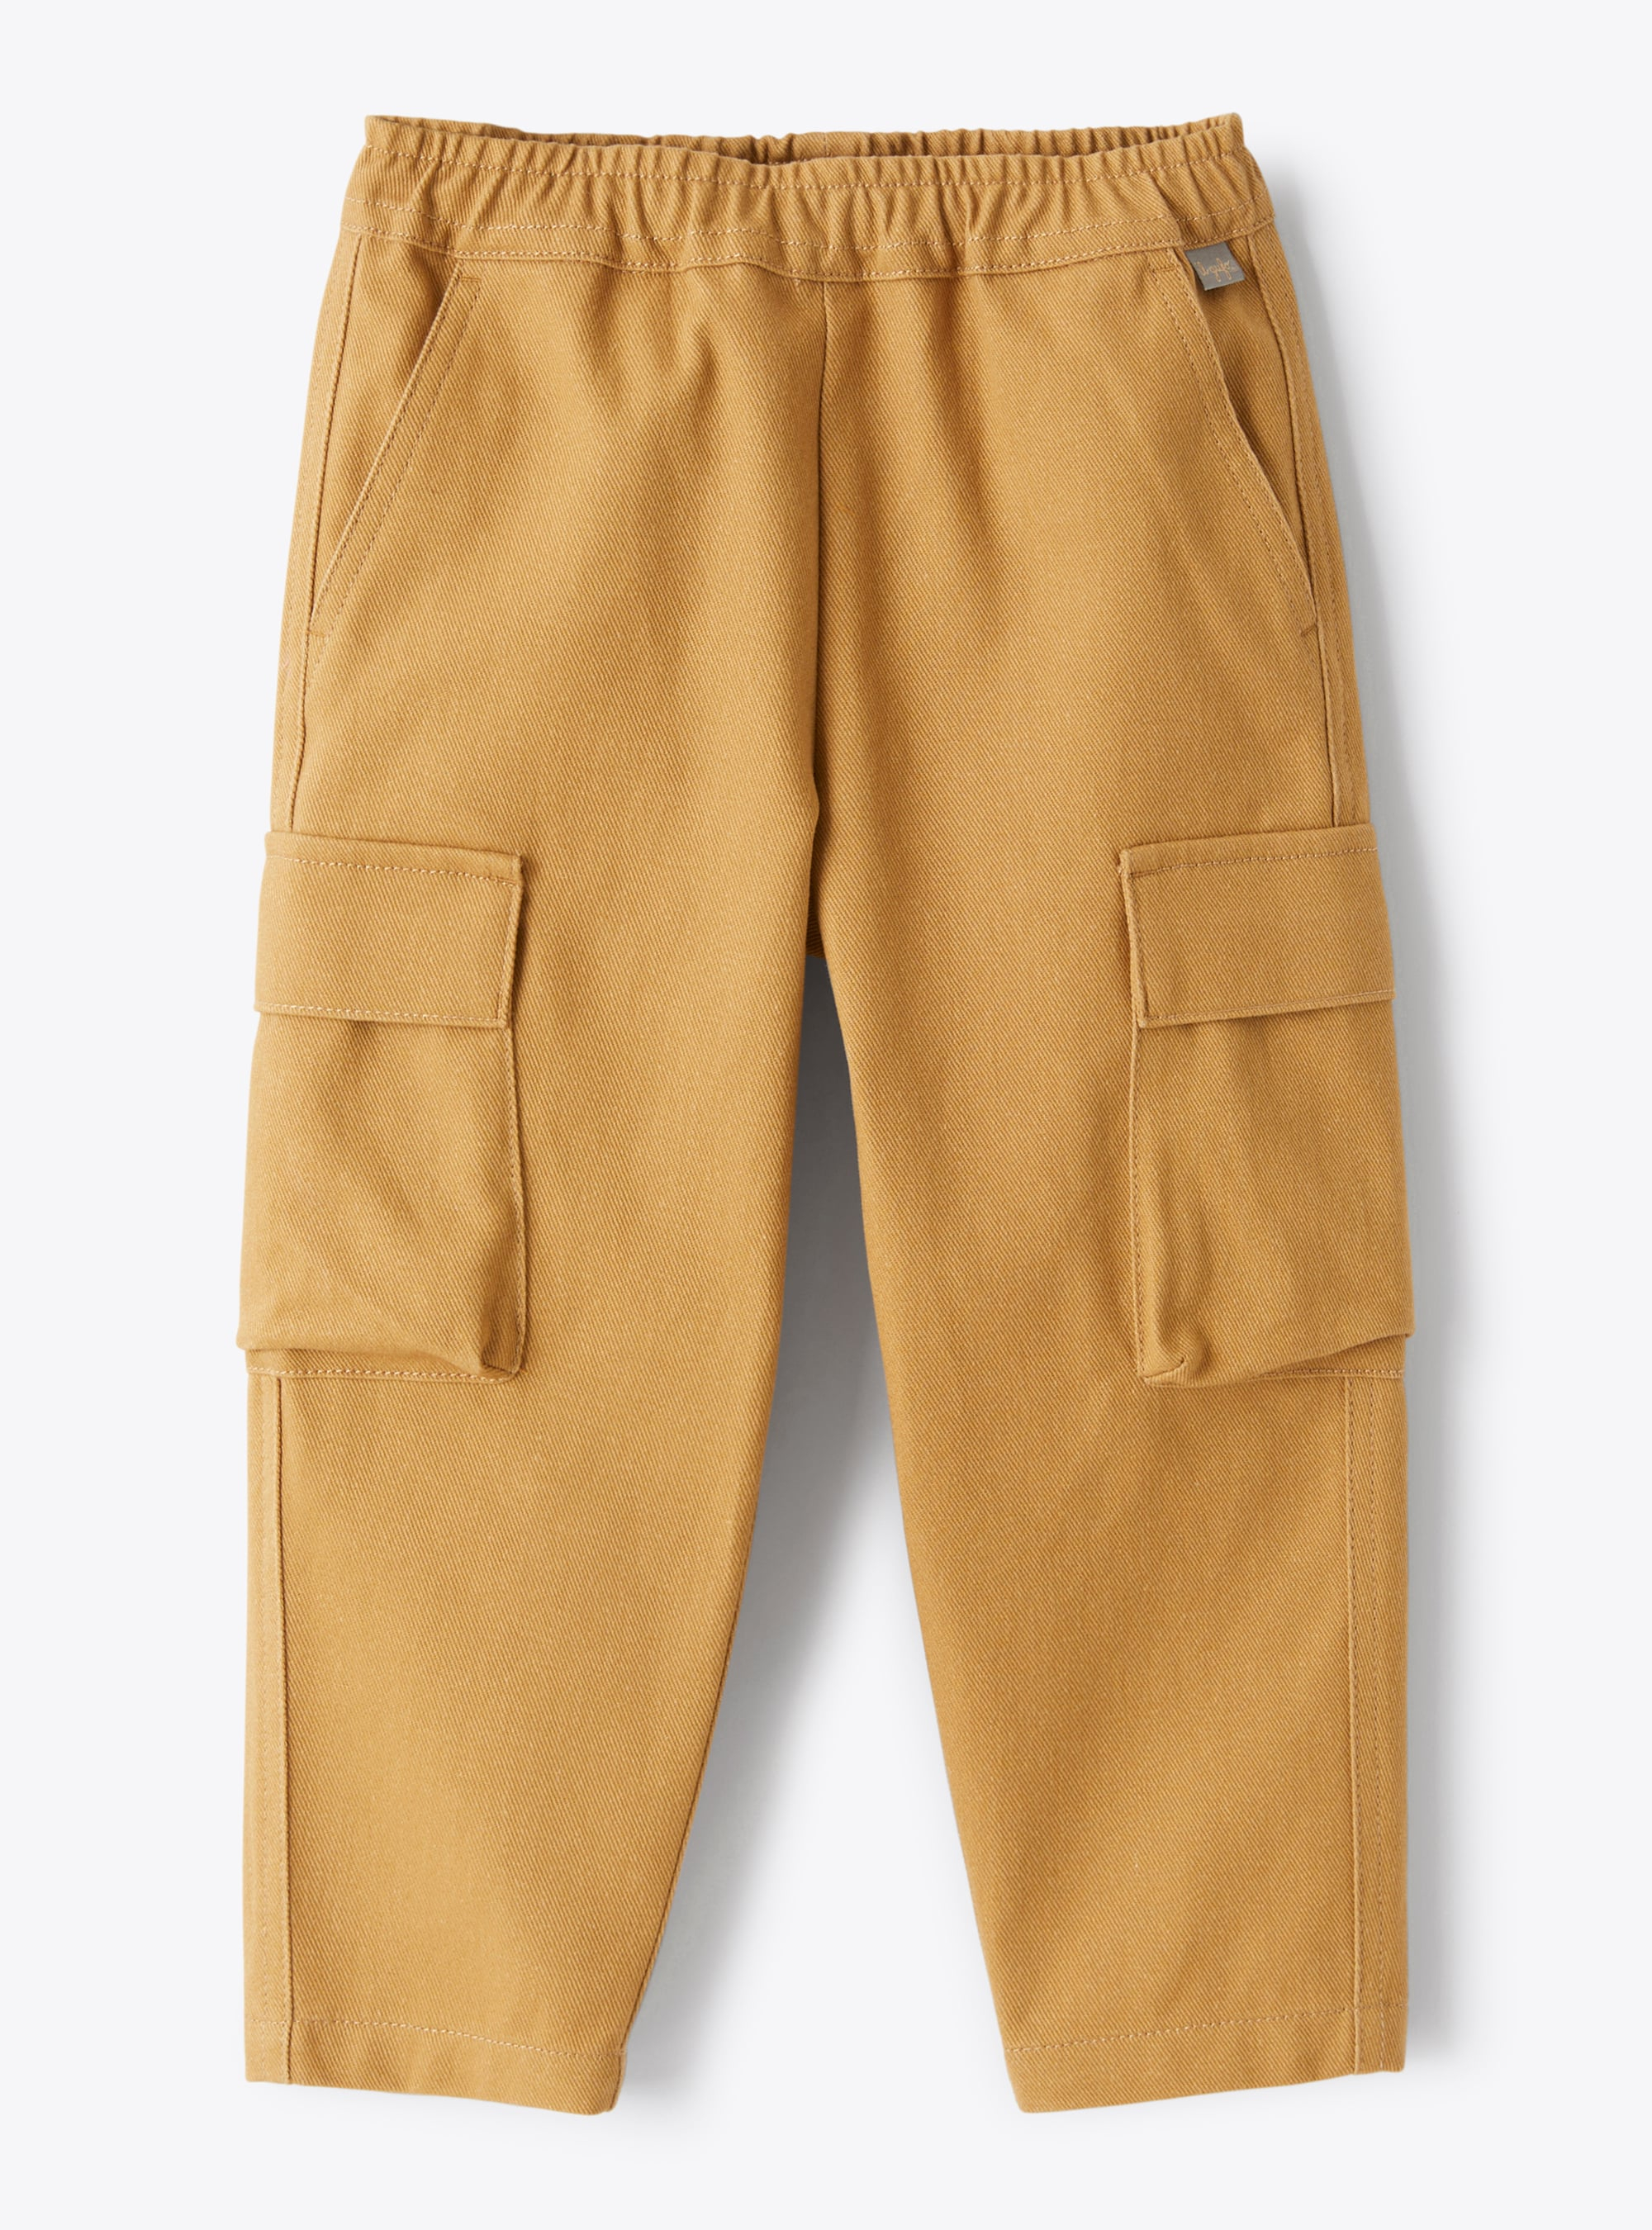 Cargo pants in brown bull cotton - Trousers - Il Gufo